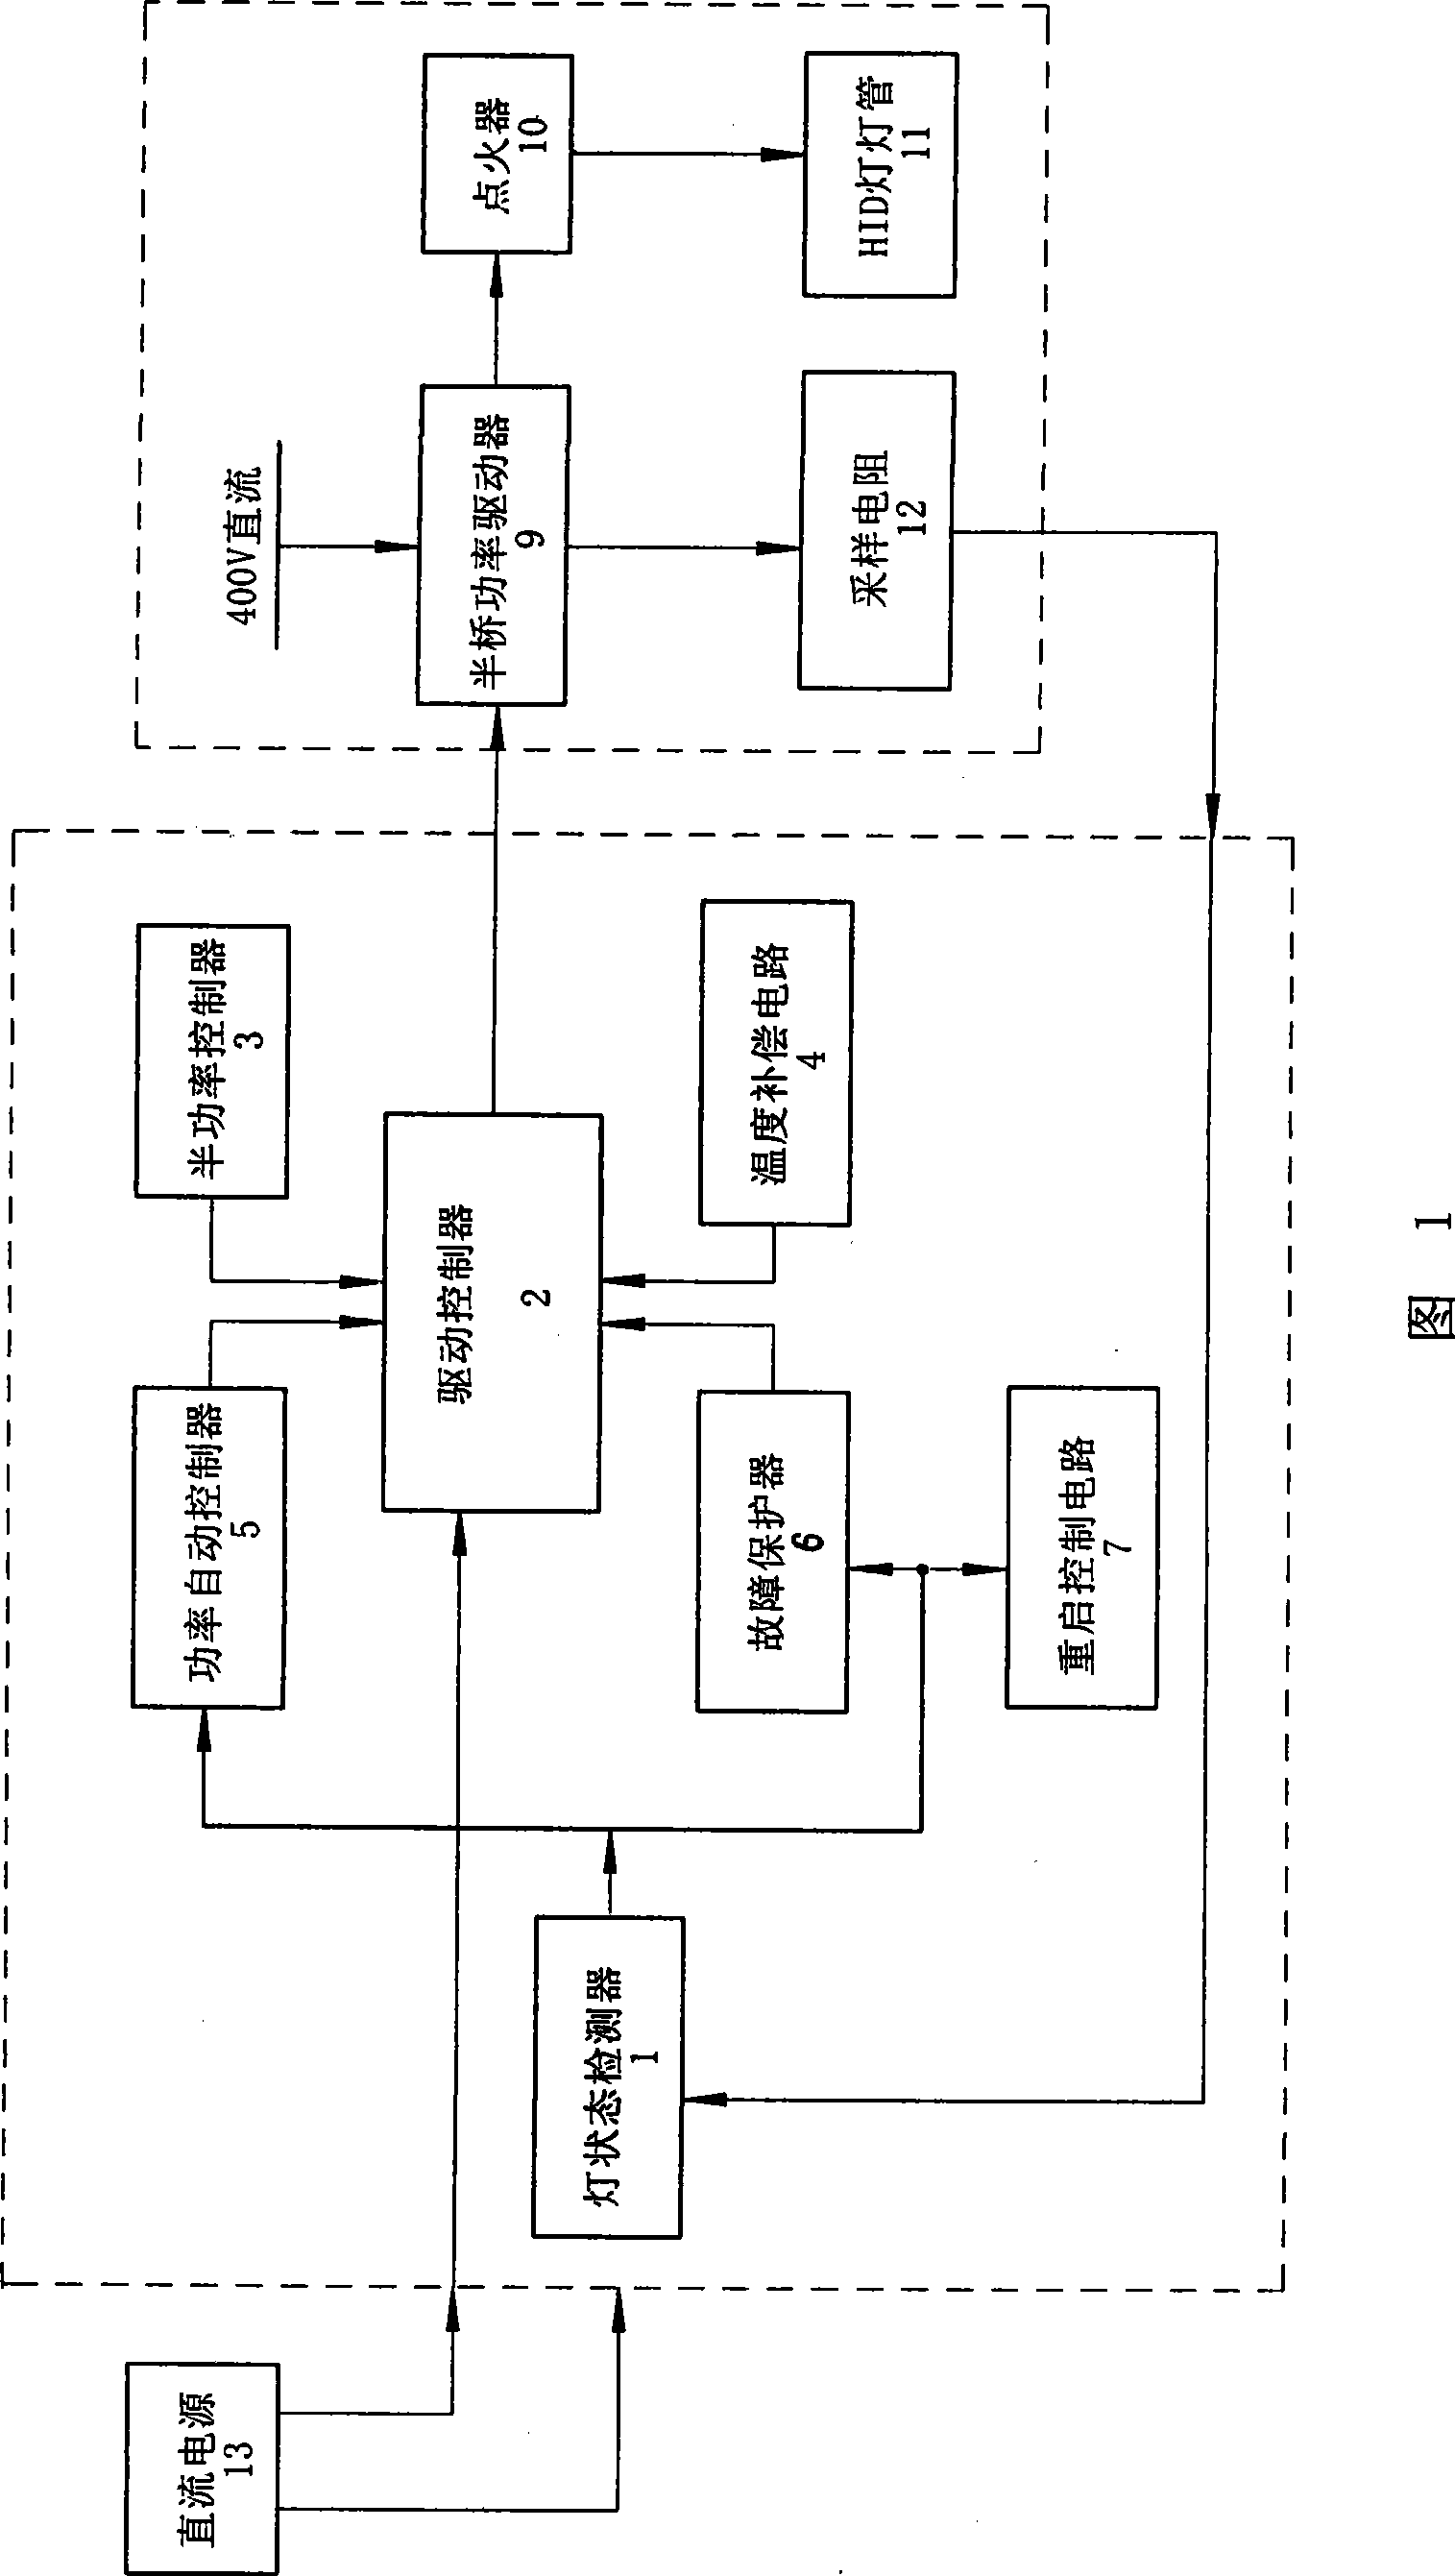 Protection and control circuit for high-power HID lamp electric ballast